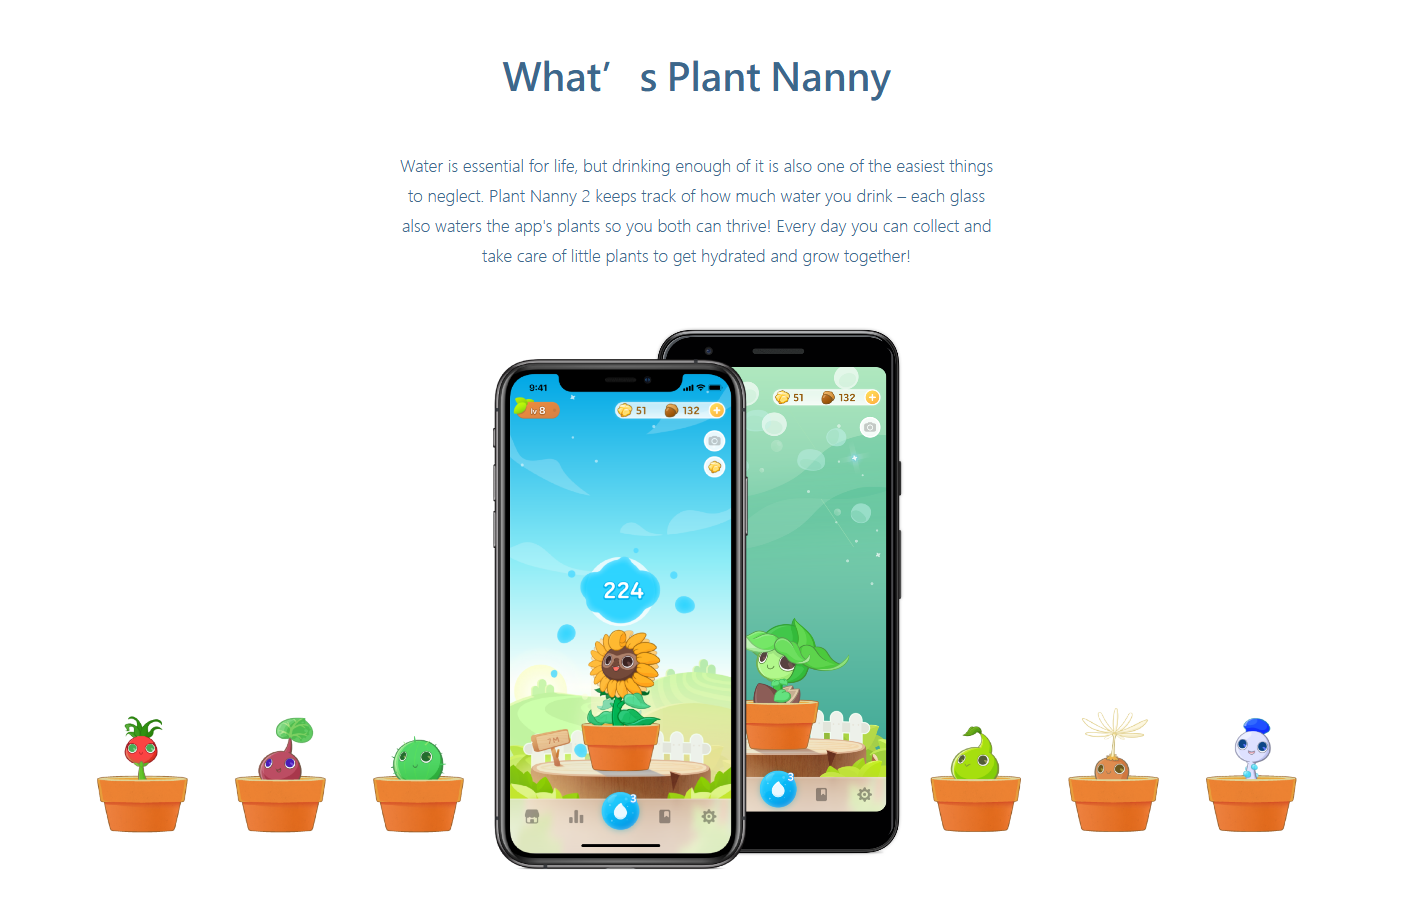 Find detailed information about Plant Nanny